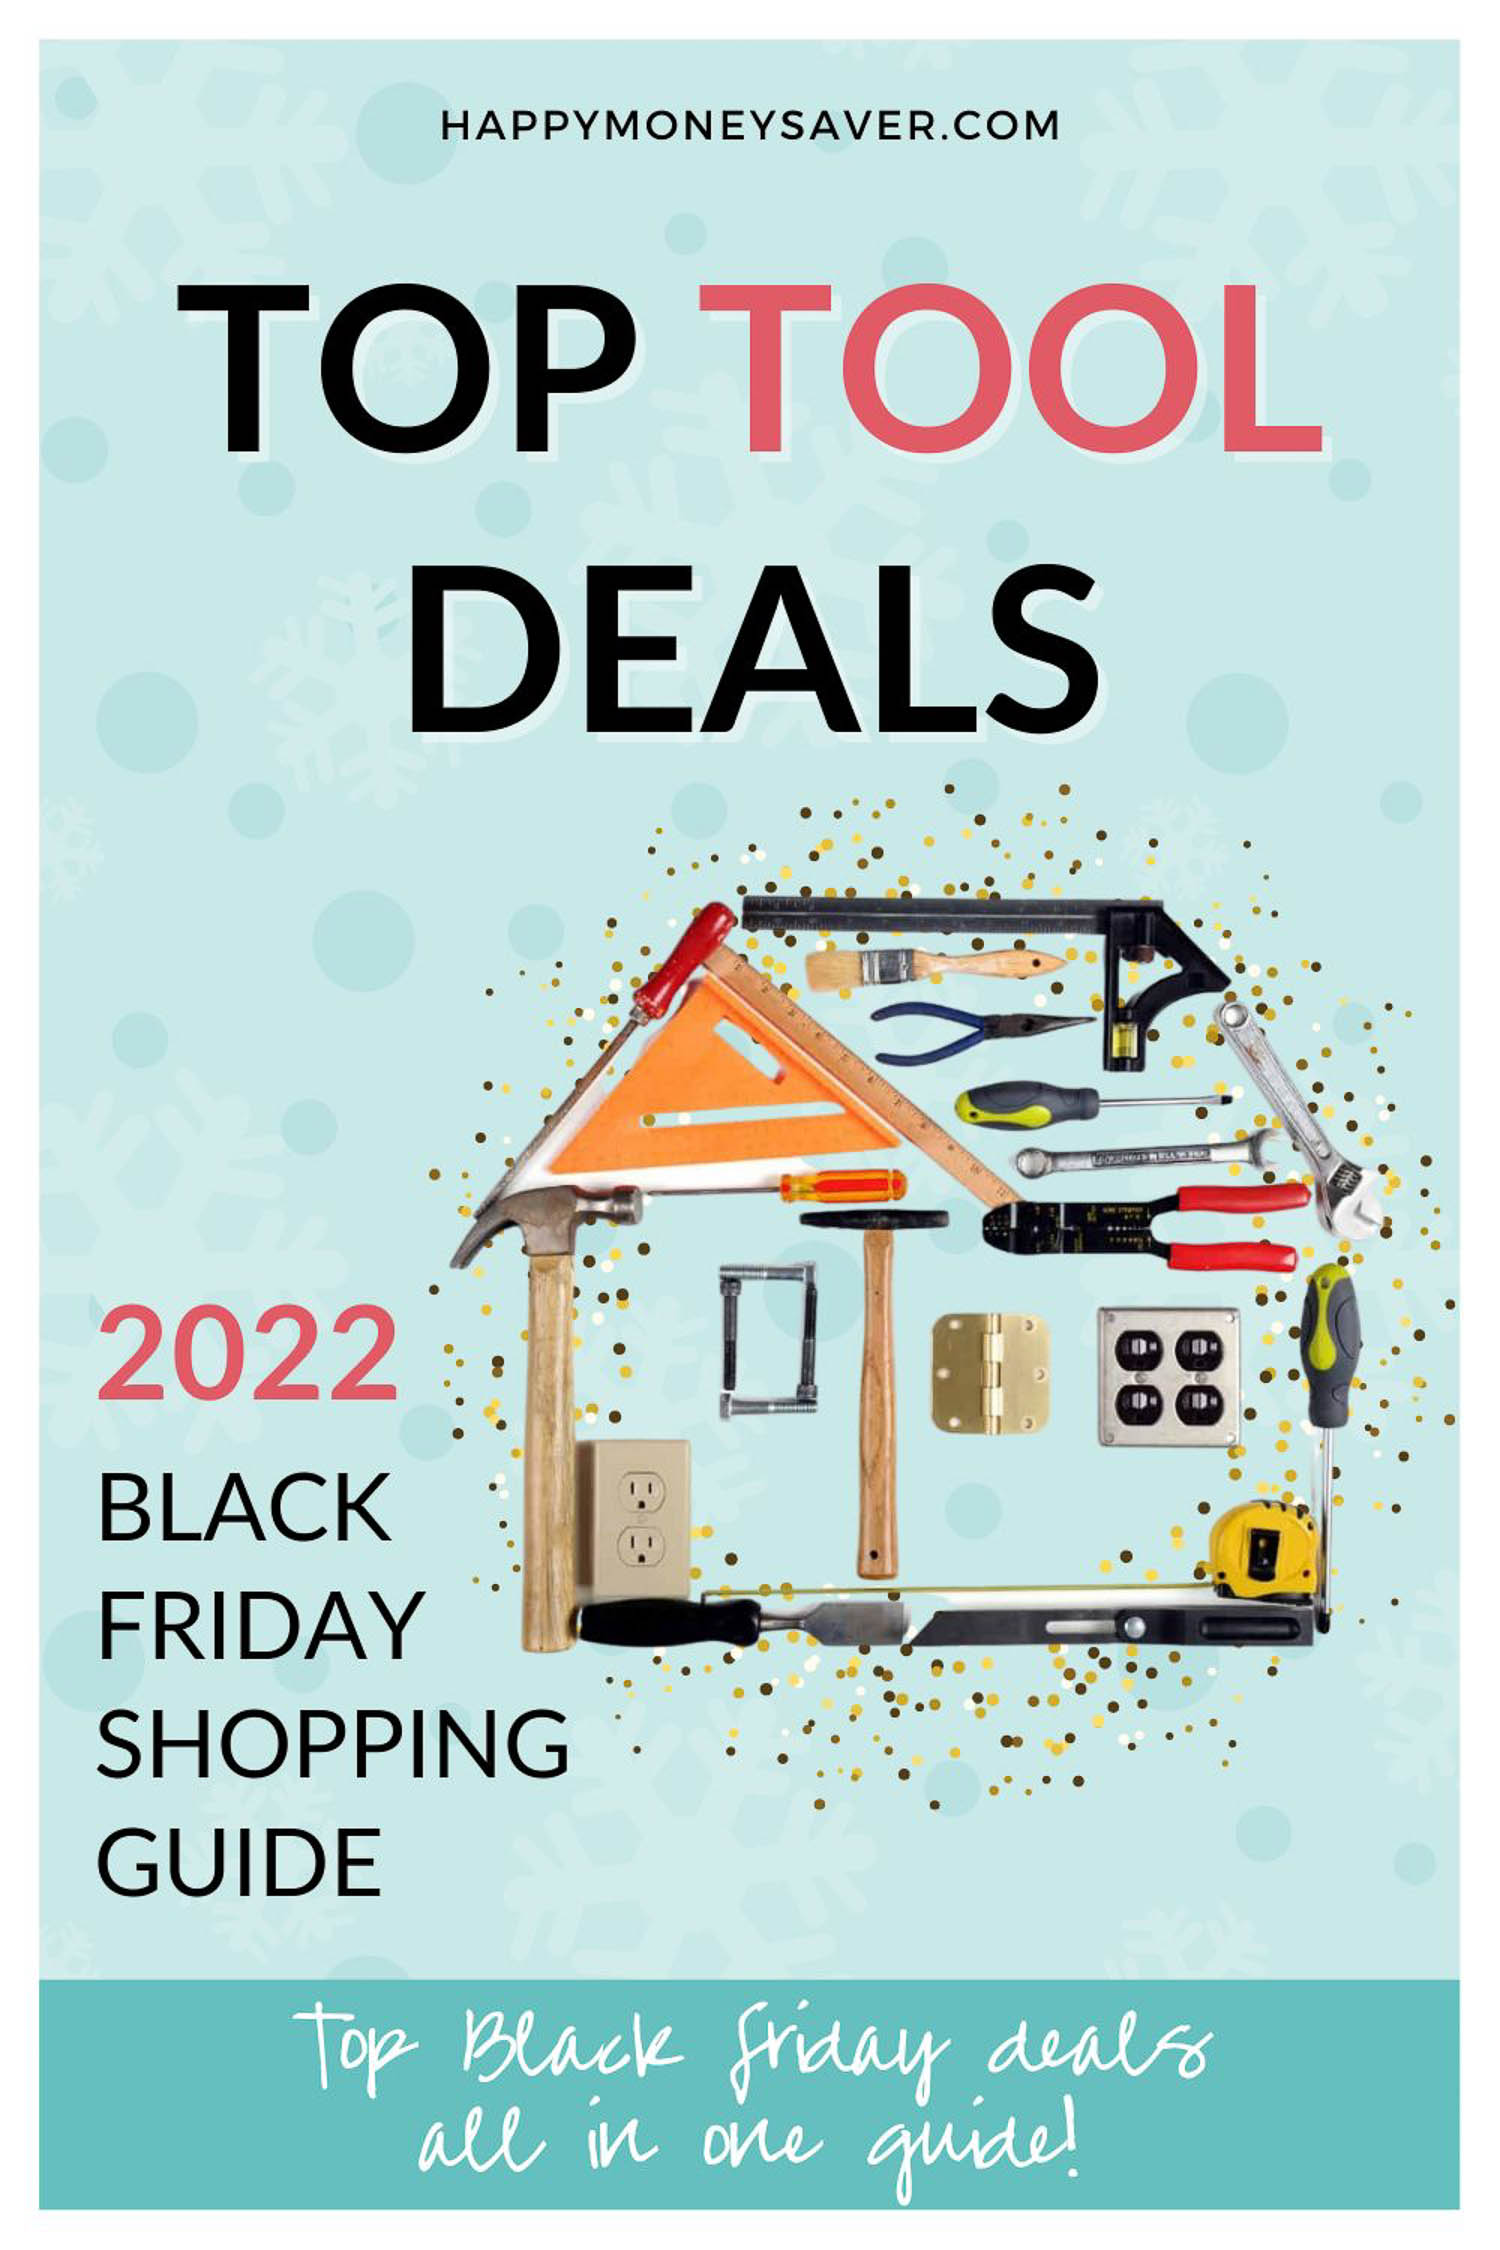 Black Friday Tool sale roundup of deals for 2022 graphic with image of house made up of tools like hammers and measuring tape and screwdriver on it and words.